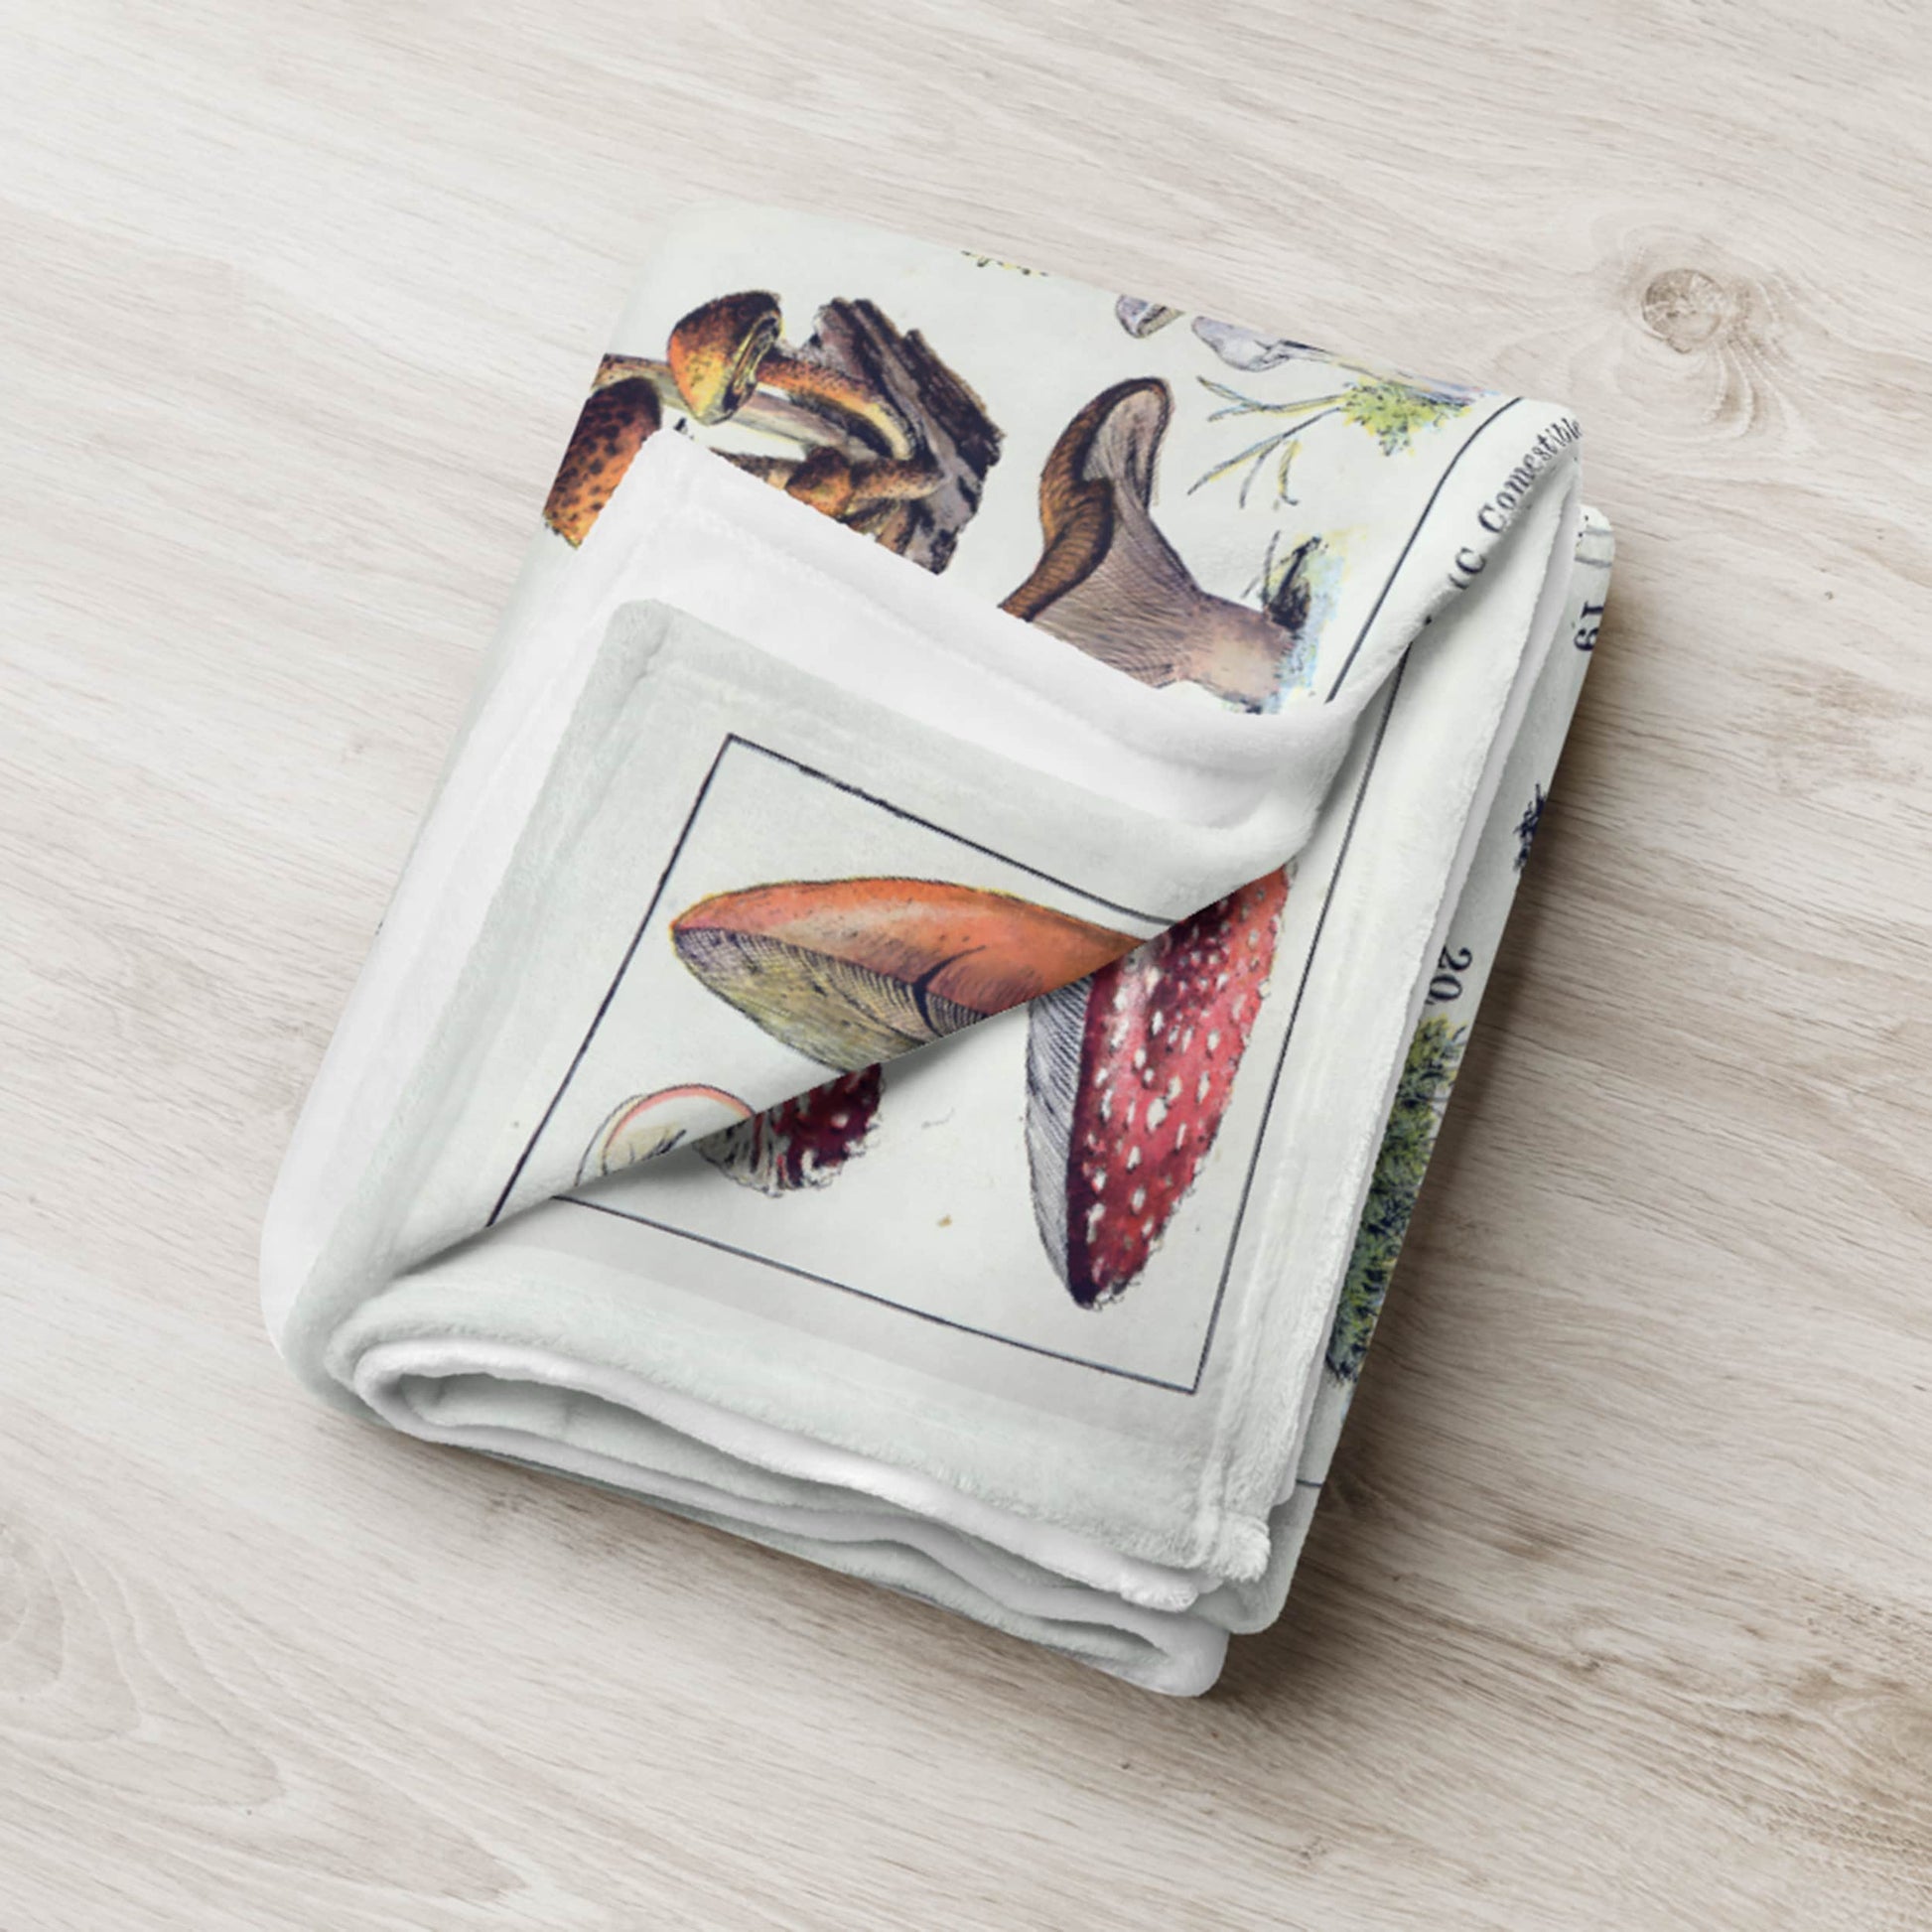 Soft fleece blanket folded neatly on a wooden floor, showcasing a vintage print of mushrooms in rich, earthy tones, a cozy addition to any home with a touch of botanical charm